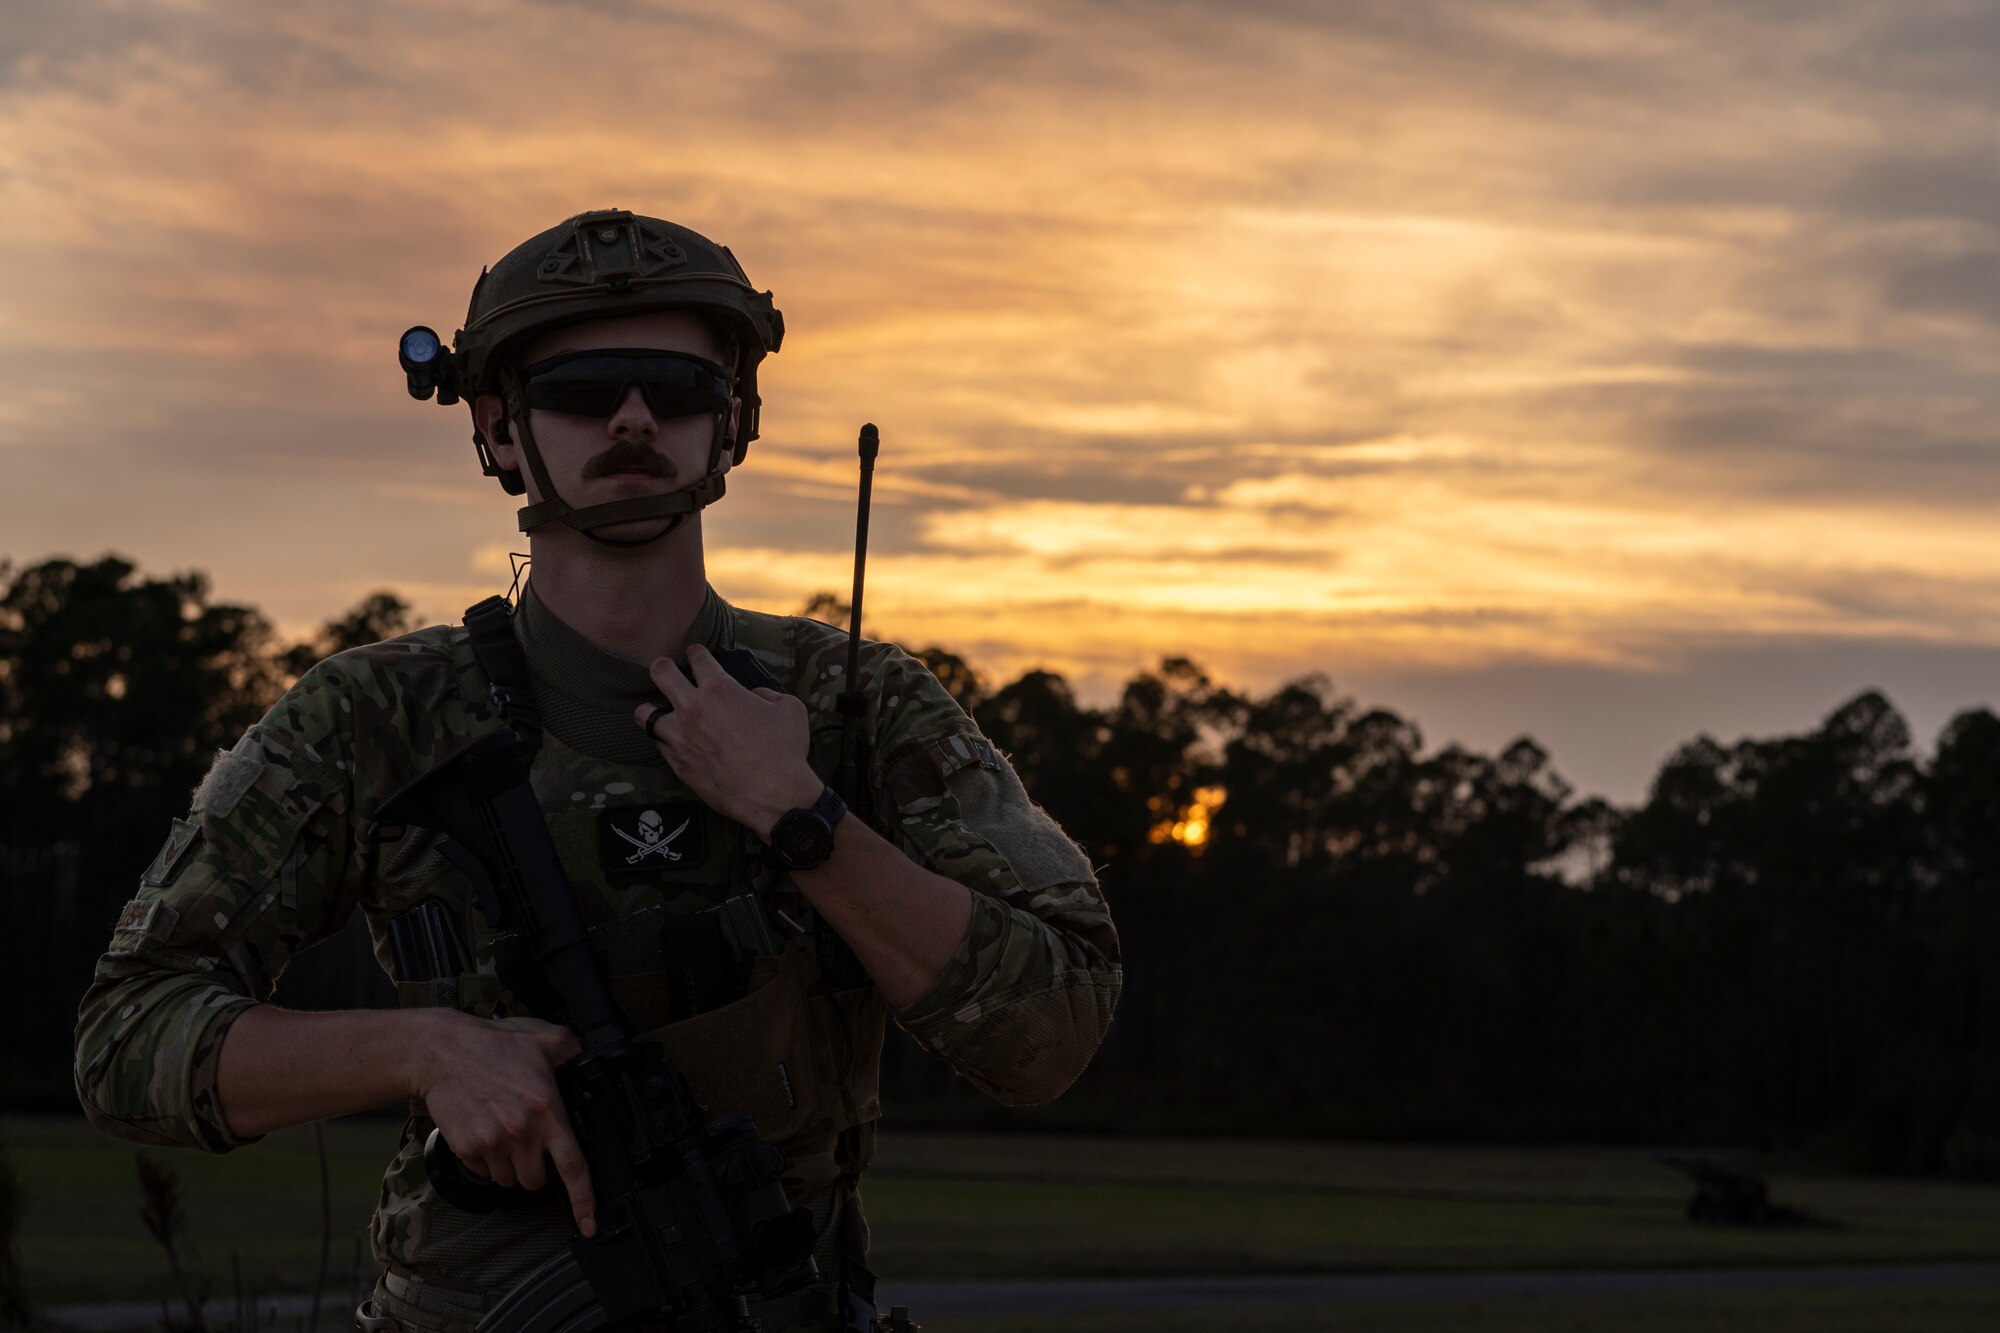 Airman poses for a photo.